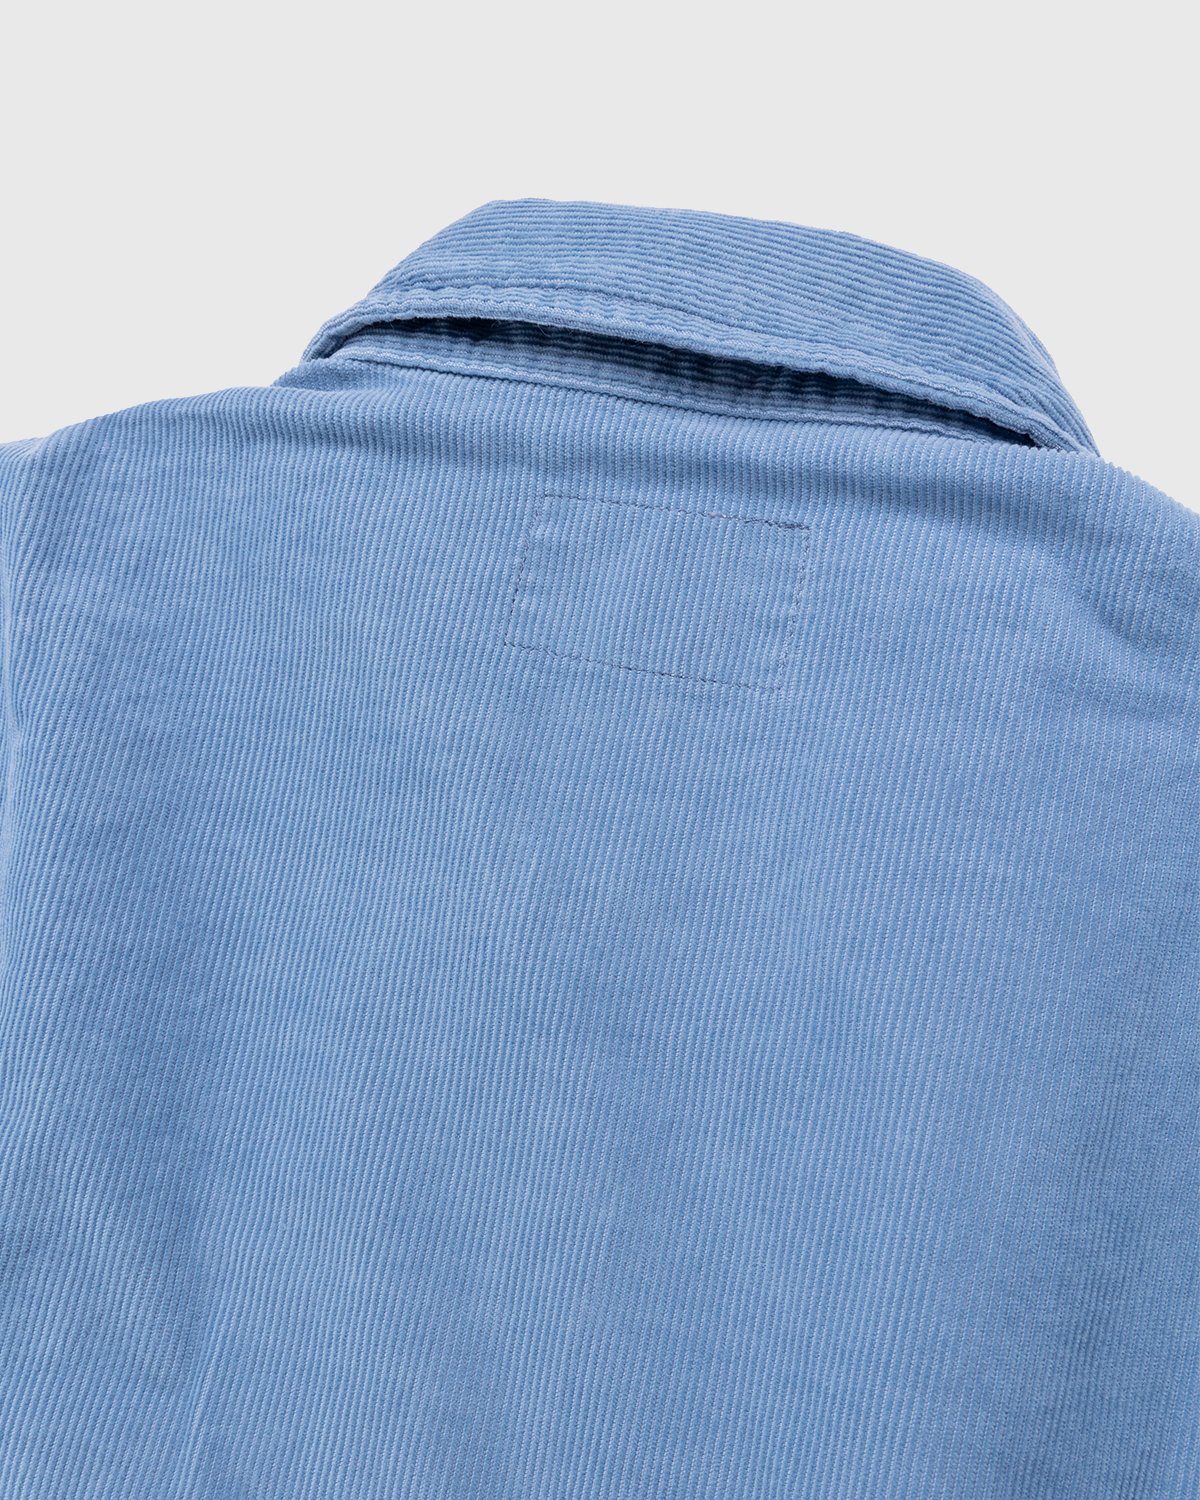 Carhartt WIP - Dixon Shirt Jacket Icy Water Rinsed - Clothing - Blue - Image 5